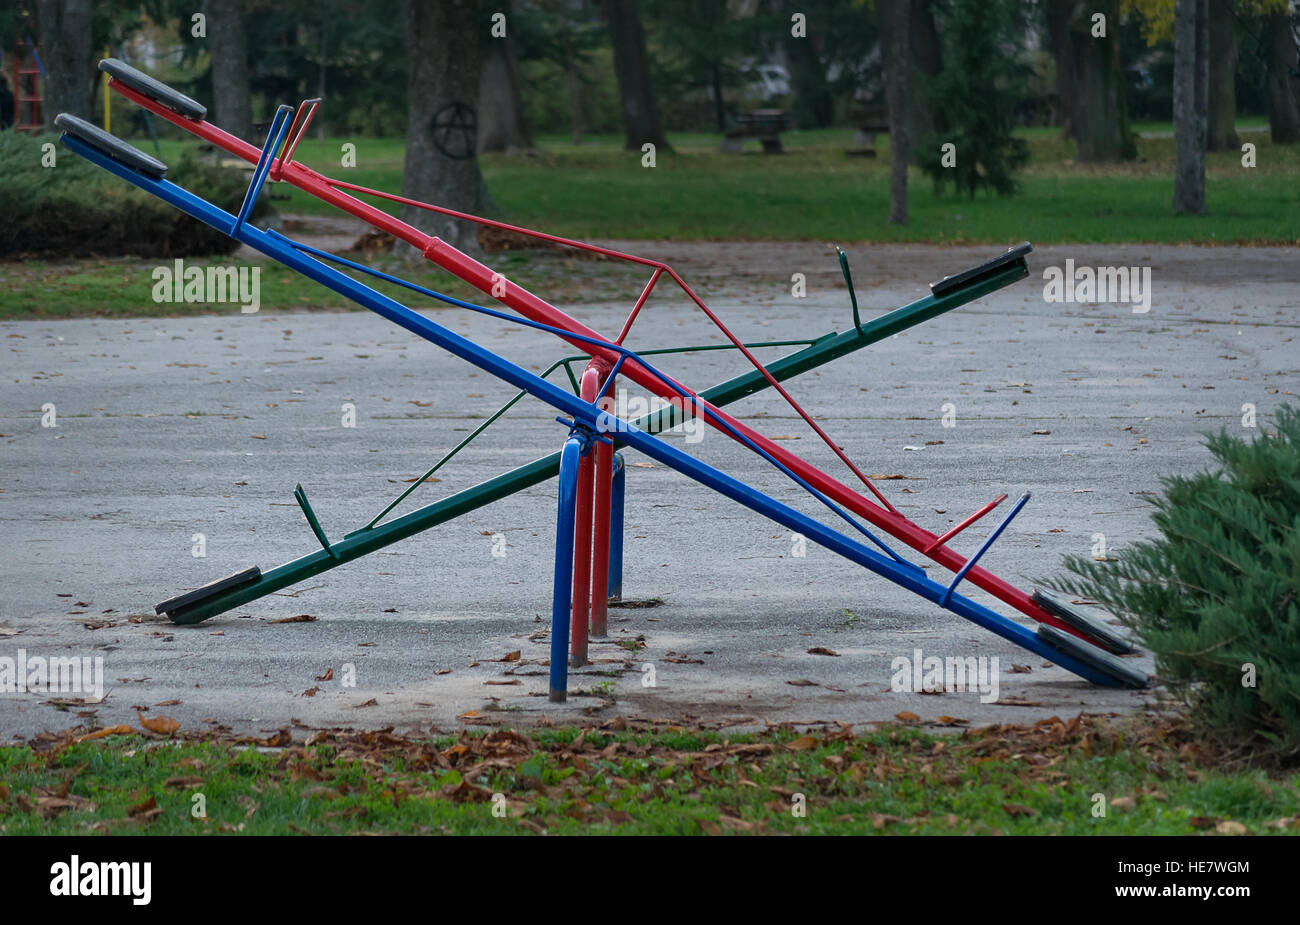 Seesaw or teeter-totter in the park Stock Photo